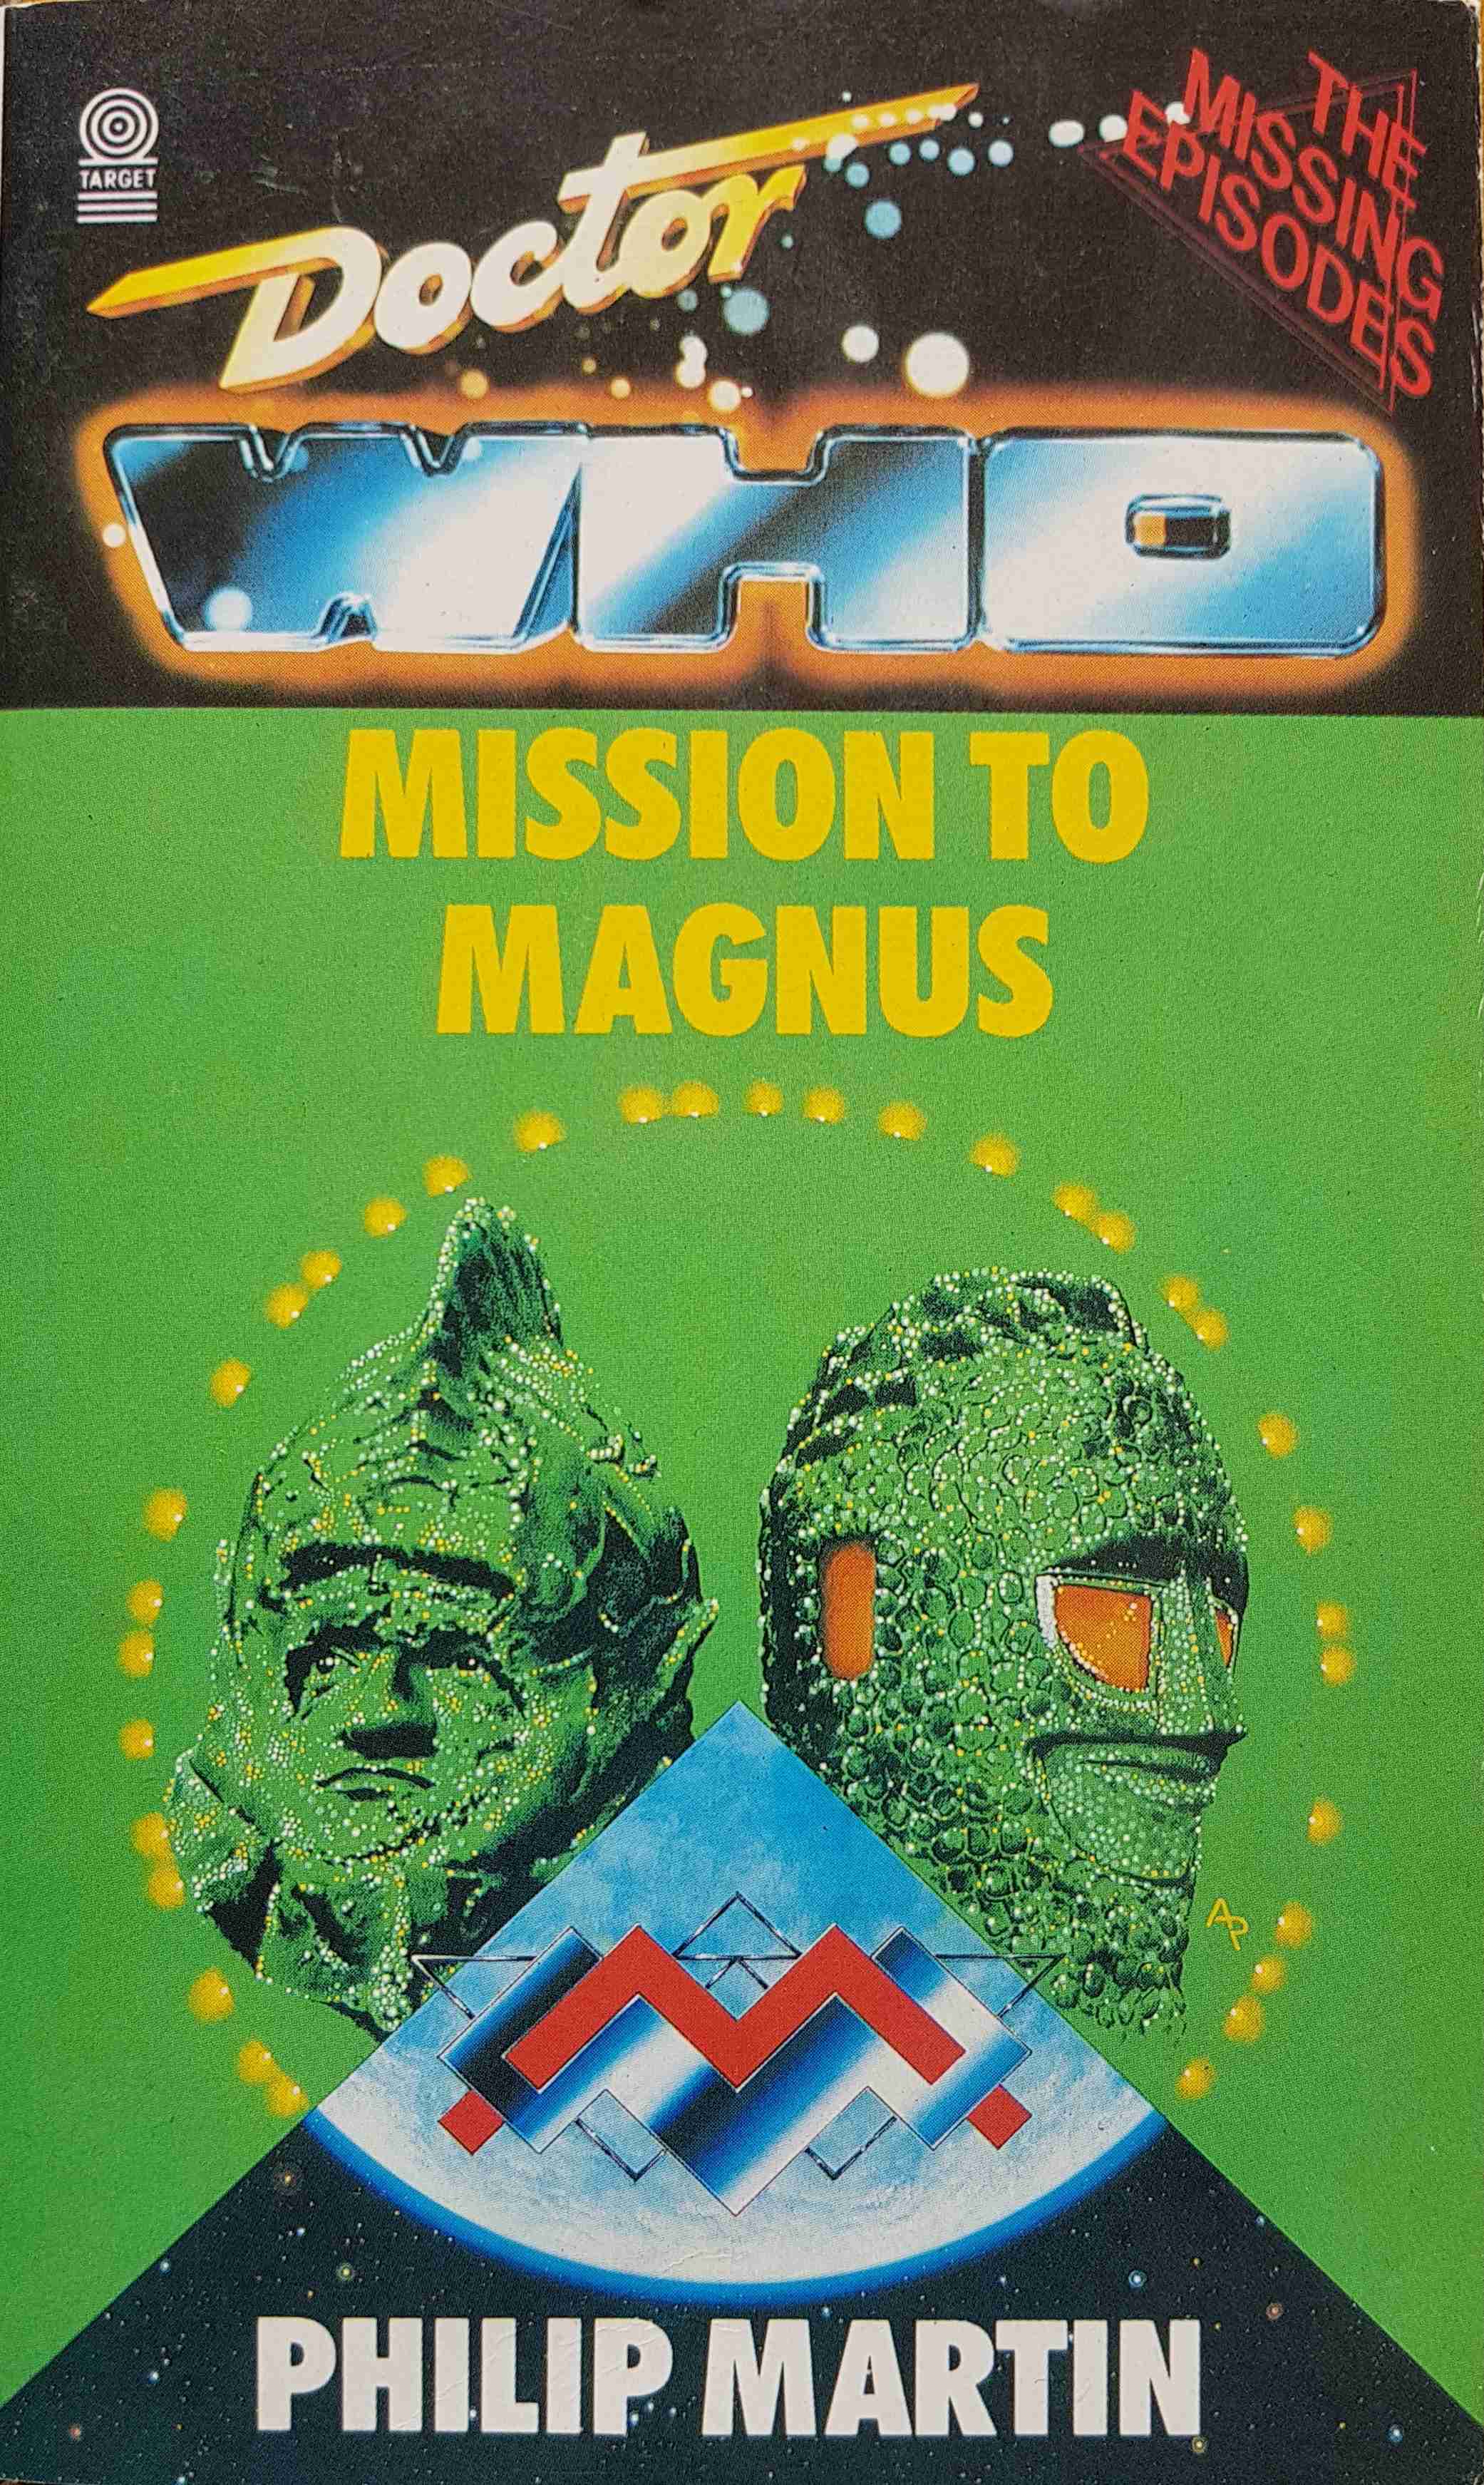 Picture of 0-426-20347-X Doctor Who - Mission to Magnus \(The missing episodes\) by artist Philip Martin from the BBC records and Tapes library